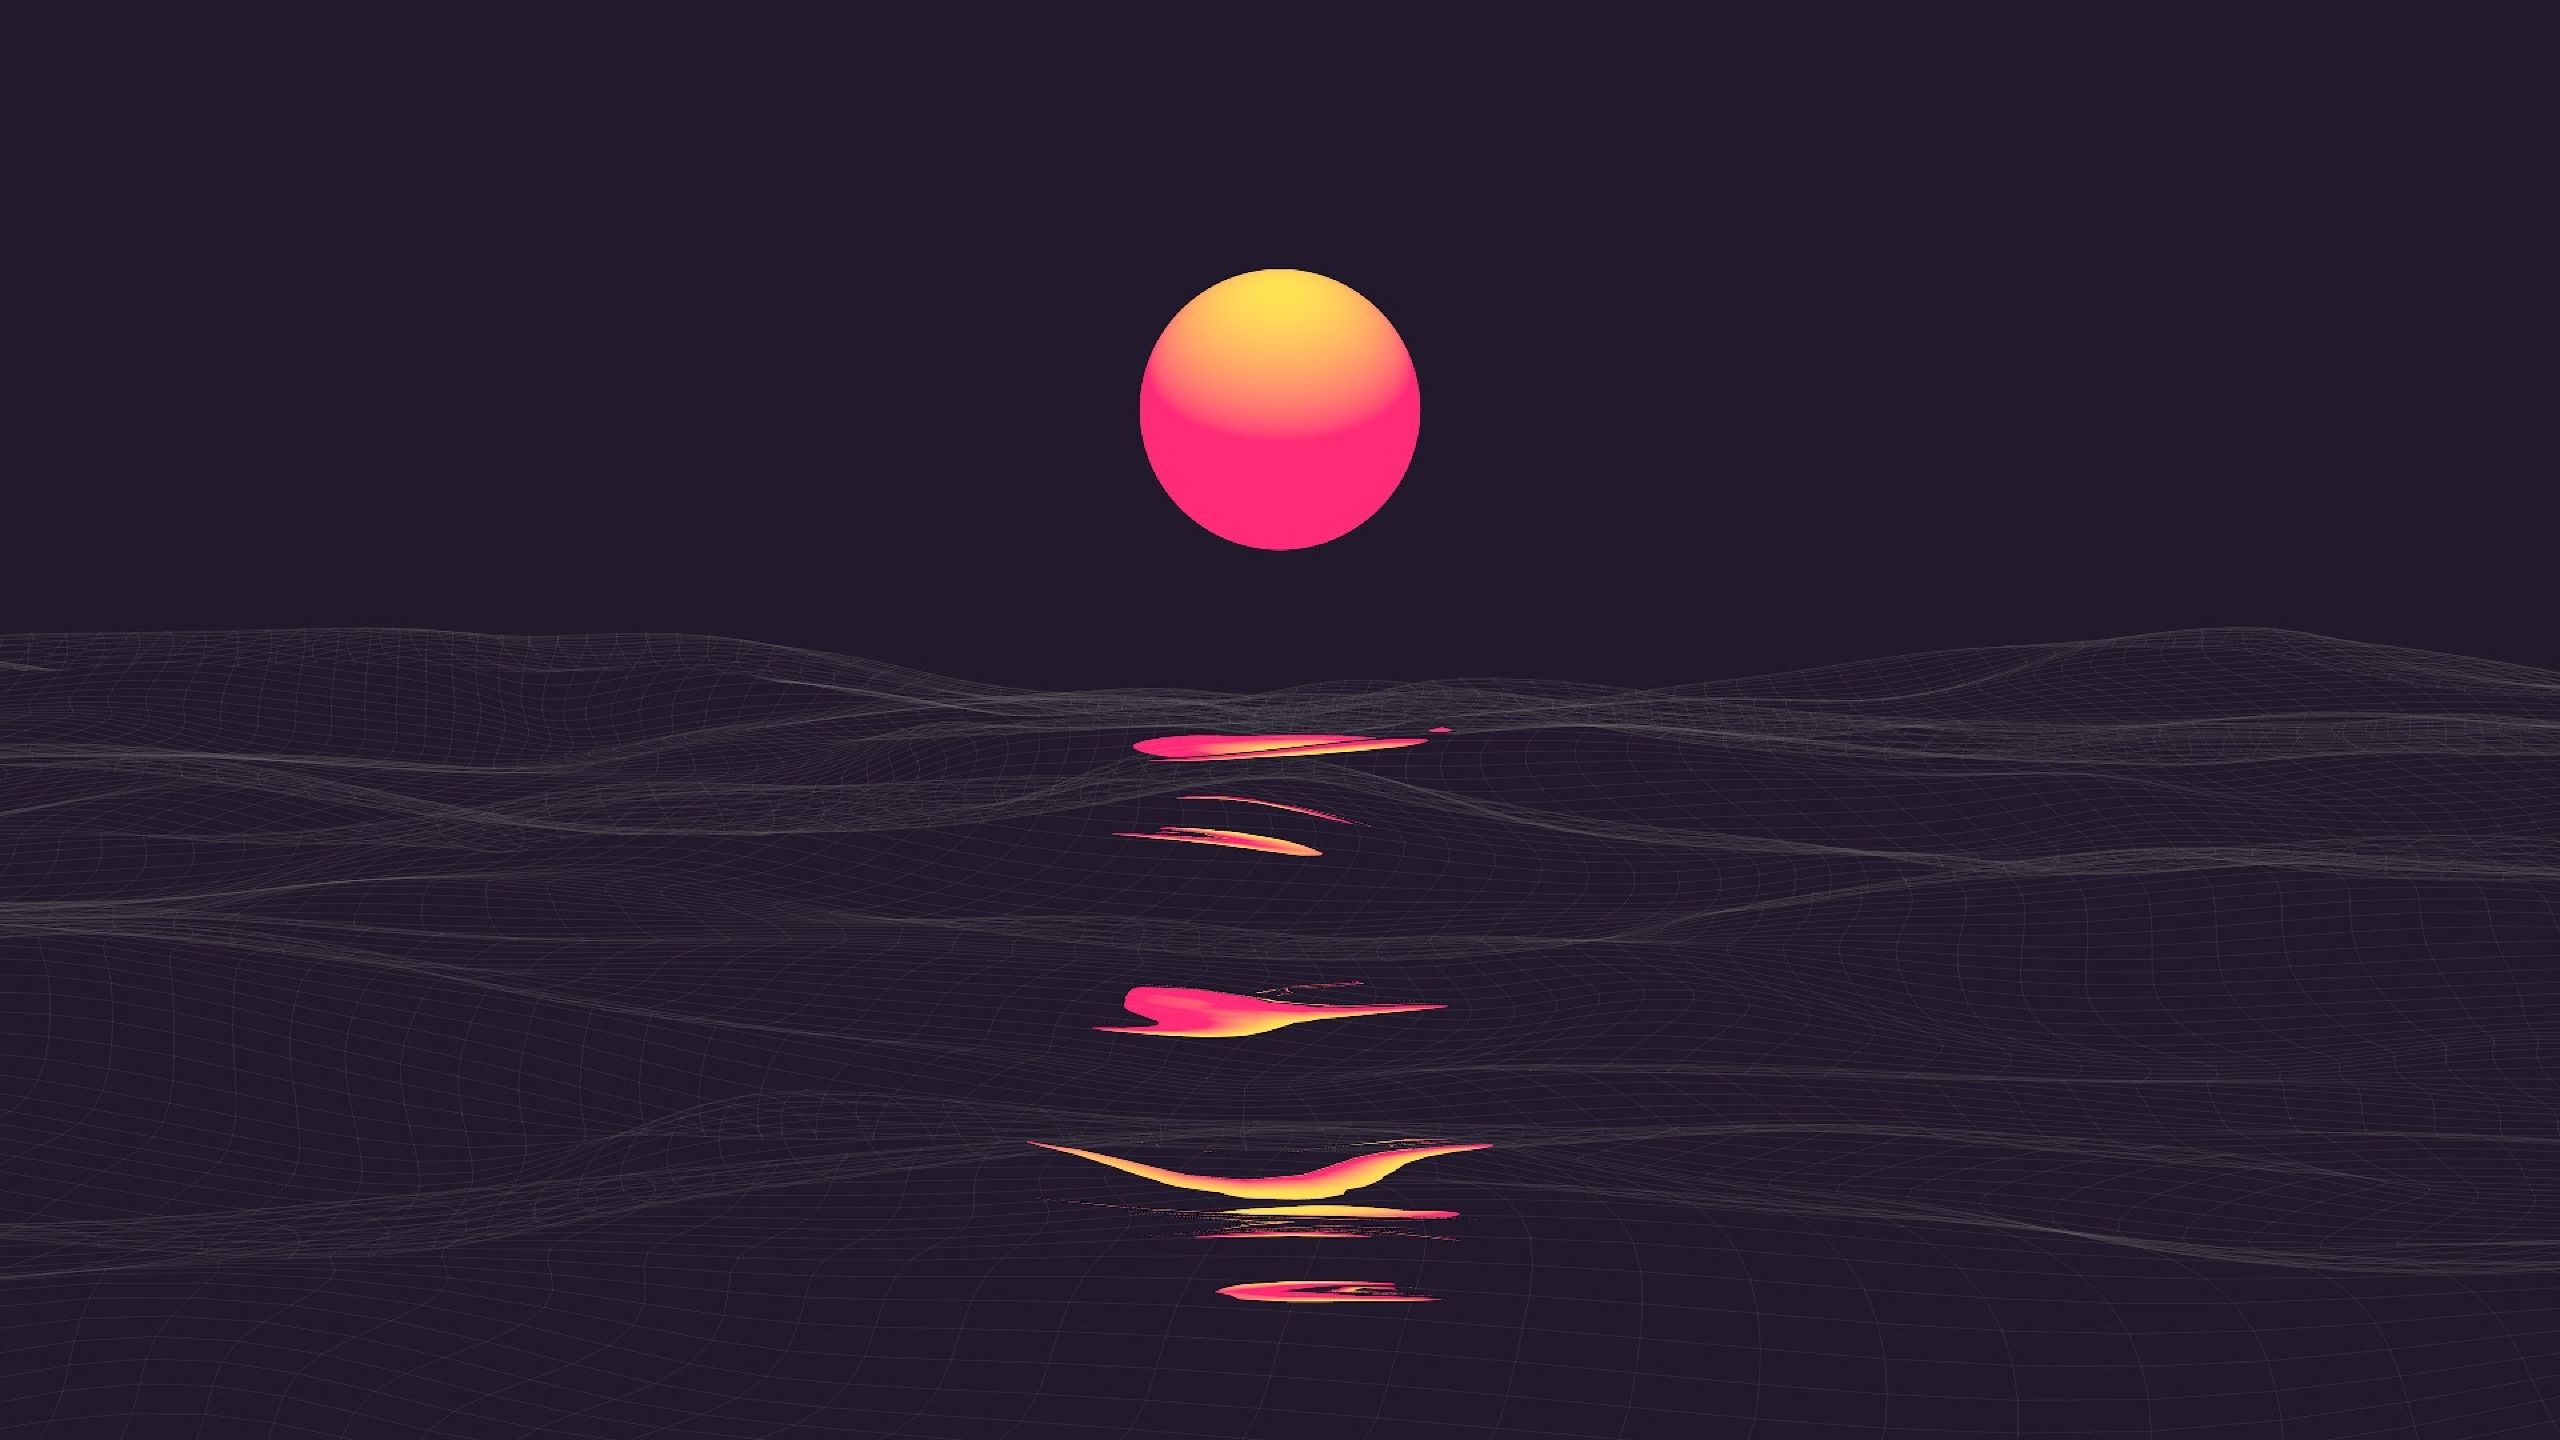 Abstract Vaporwave Retrowave Sun Reflaction 1440P Resolution Wallpaper, HD Abstract 4K Wallpaper, Image, Photo and Background